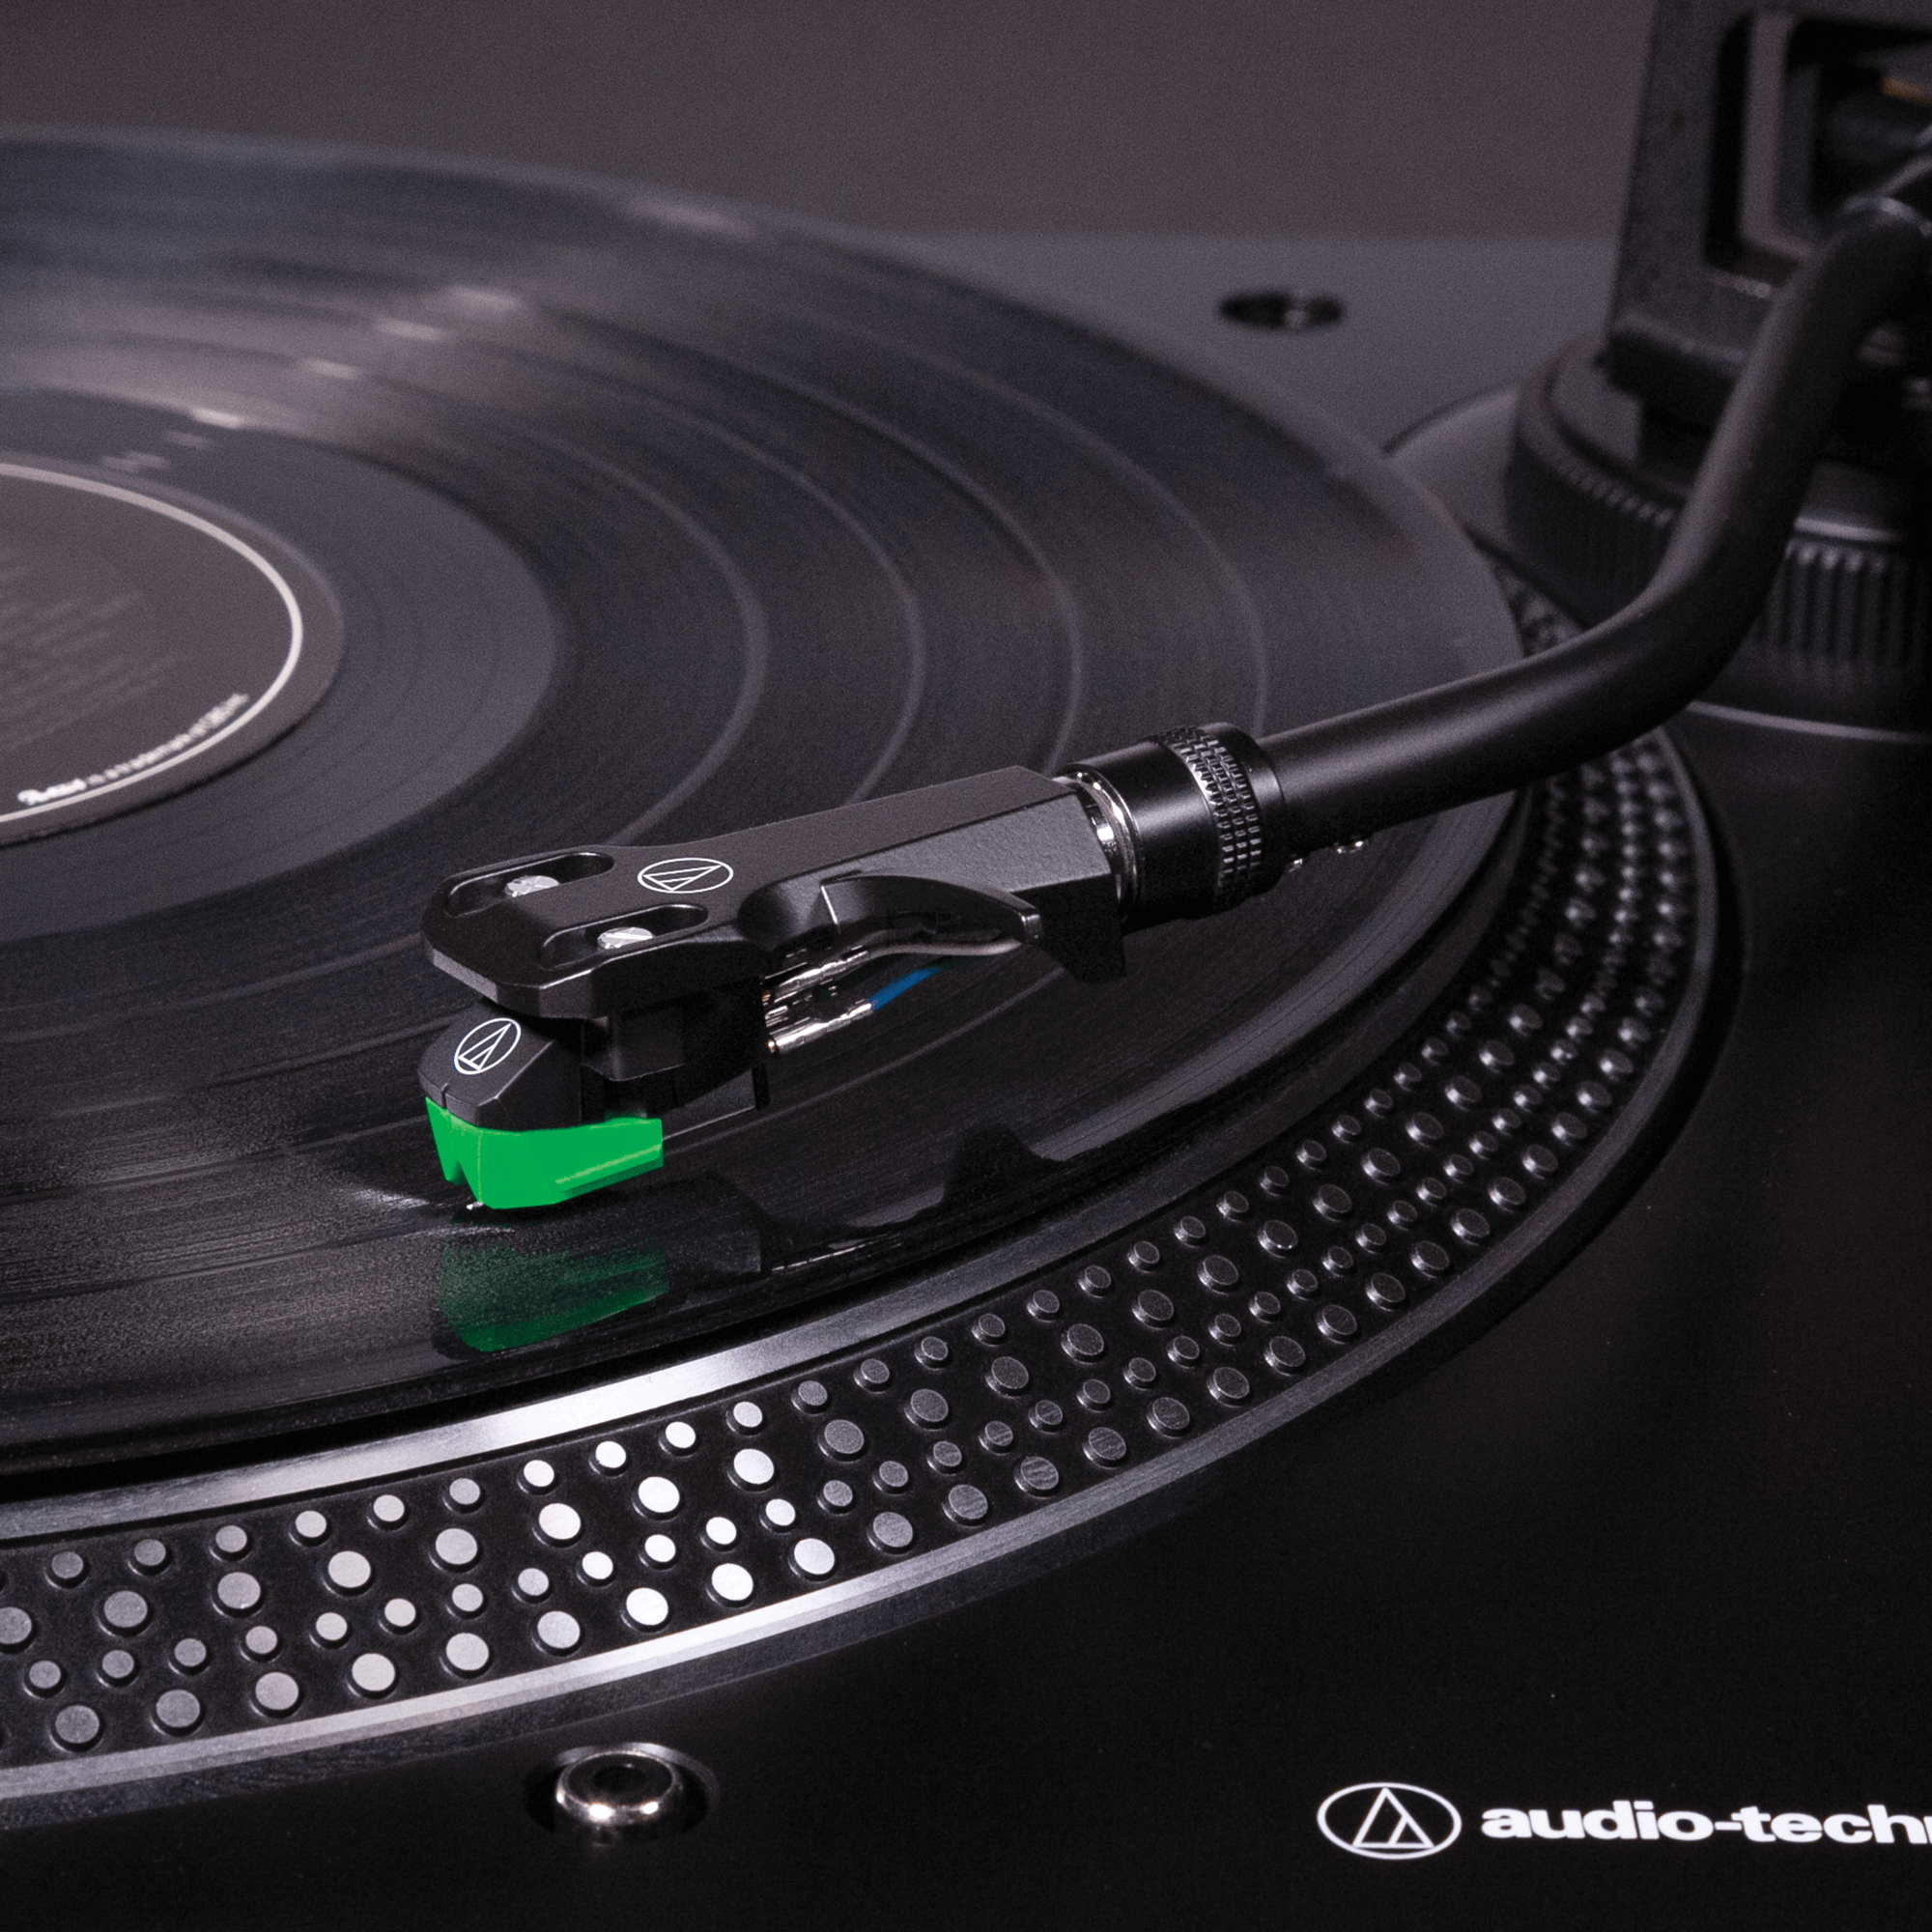 Audio-Technica AT-LP120USBHC Turntable, Direct Drive USB